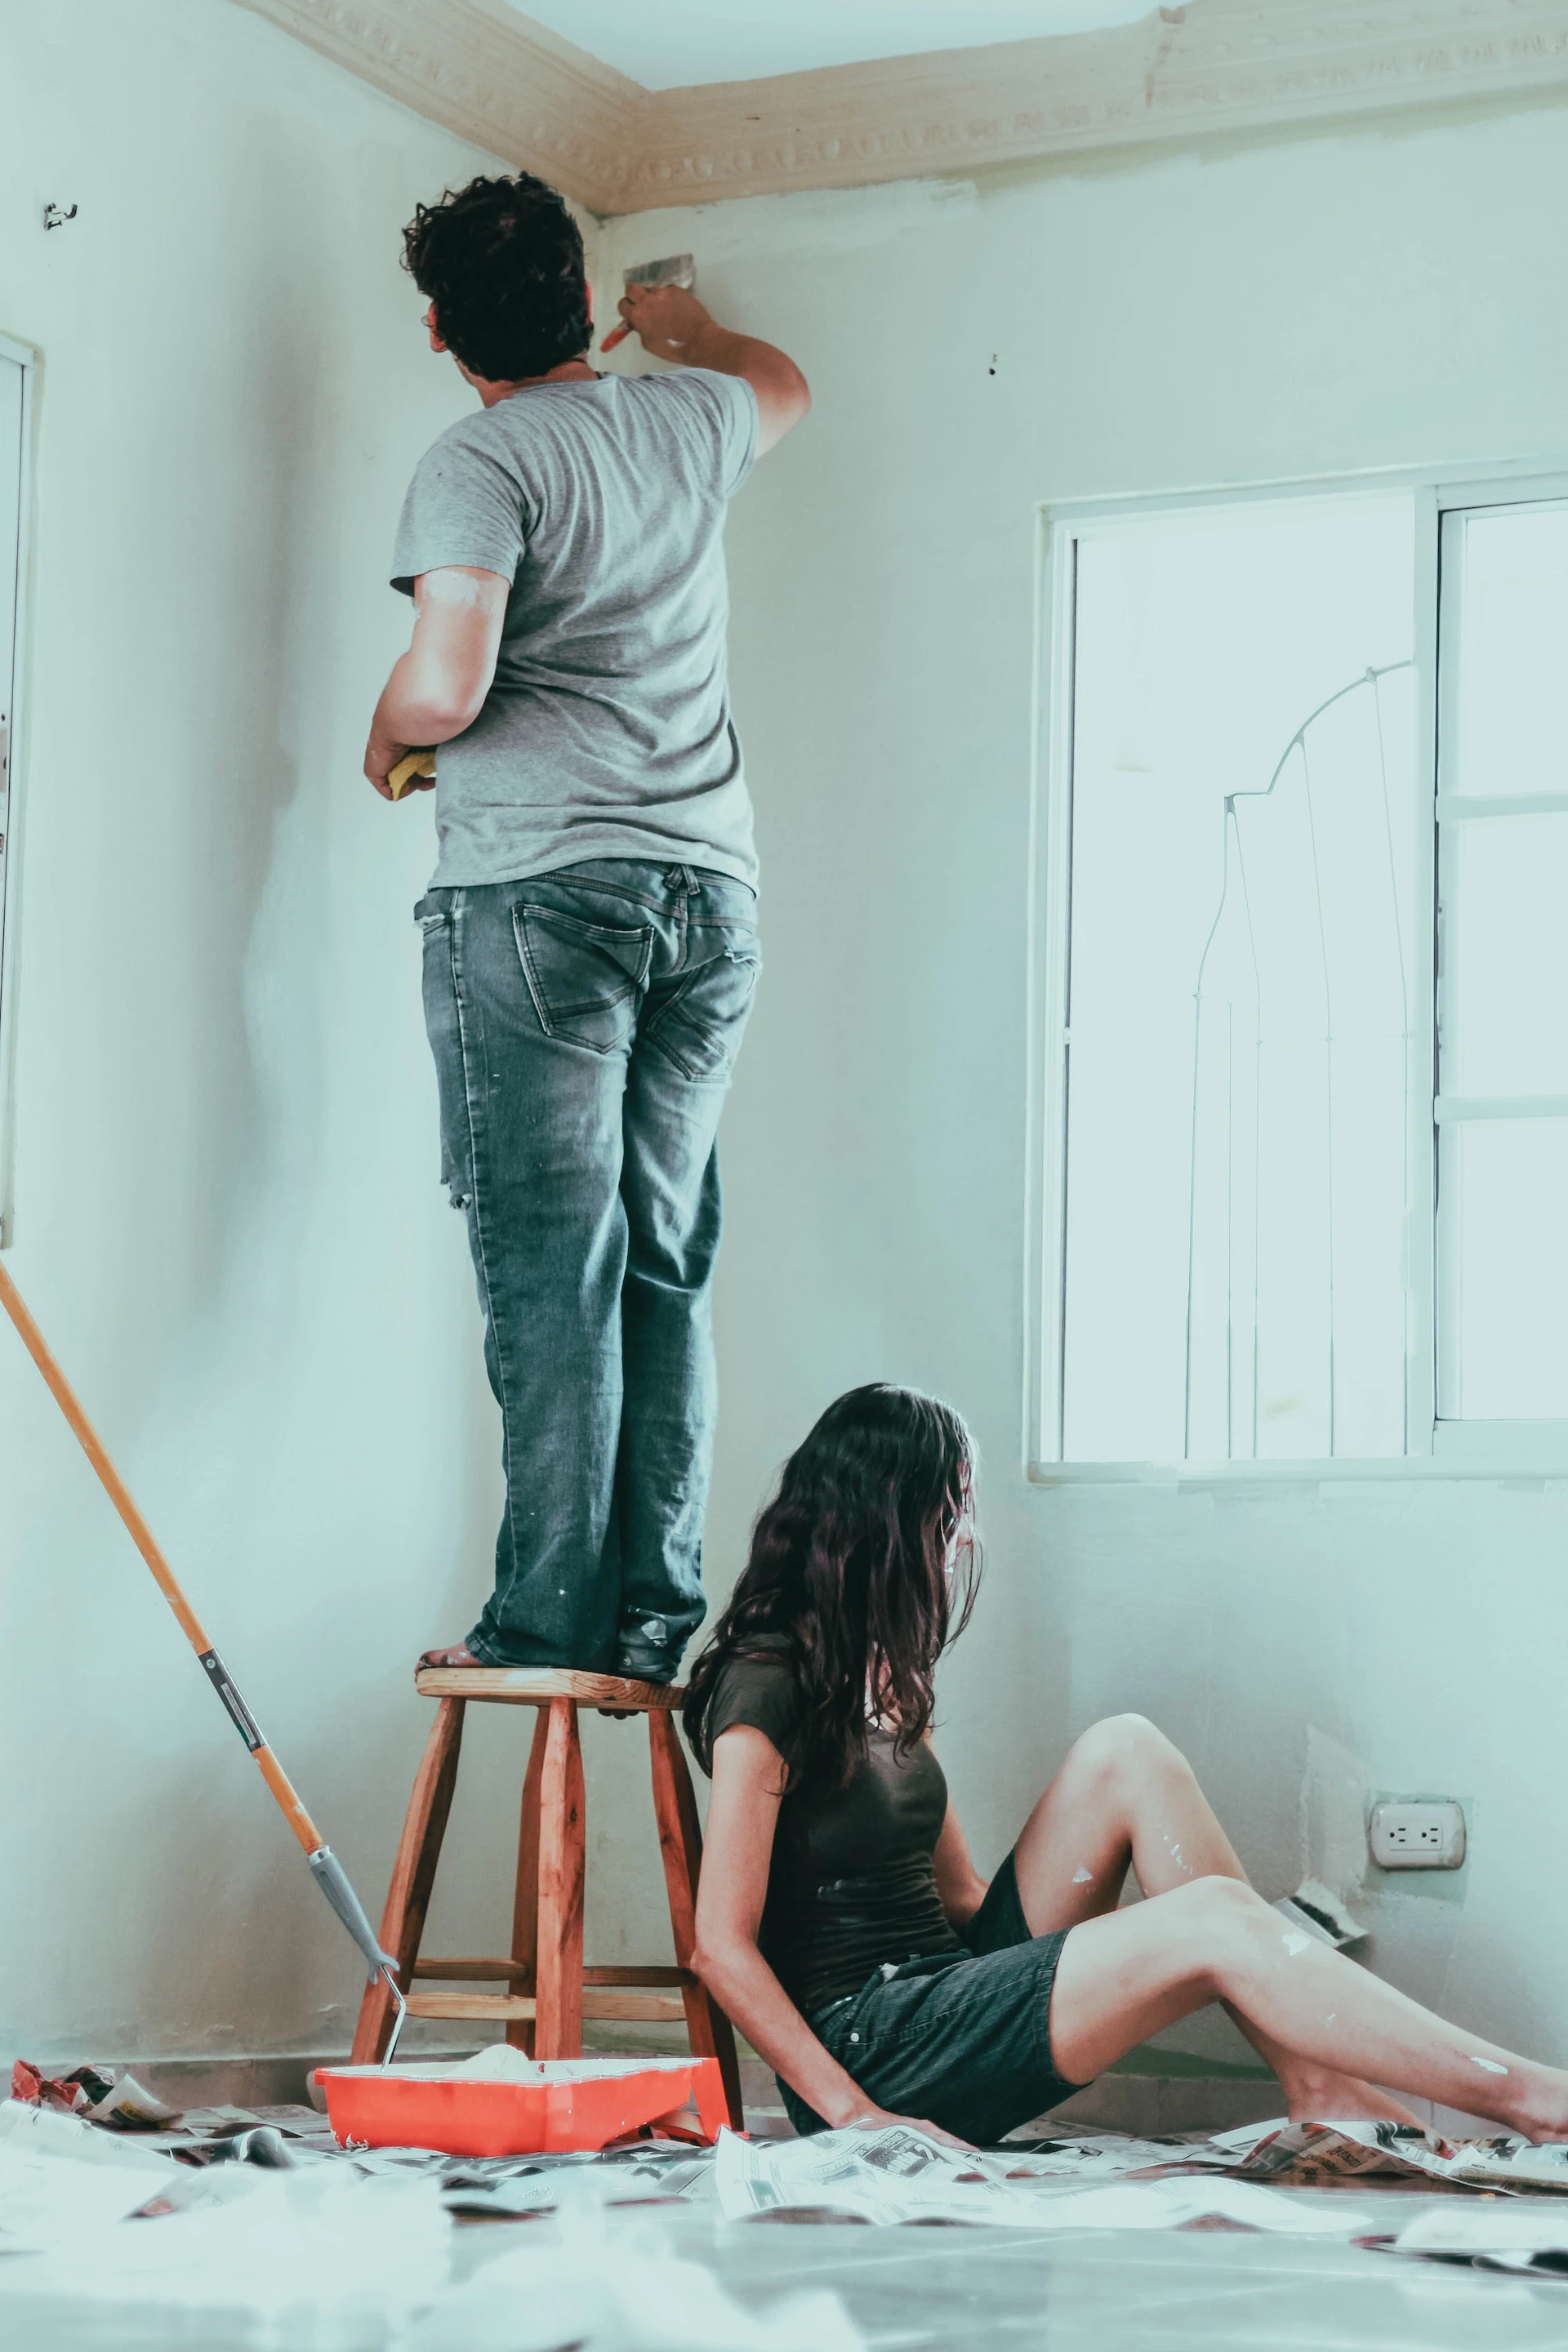 two people painting a room white - man standing on stool to the left, woman sitting on the floor